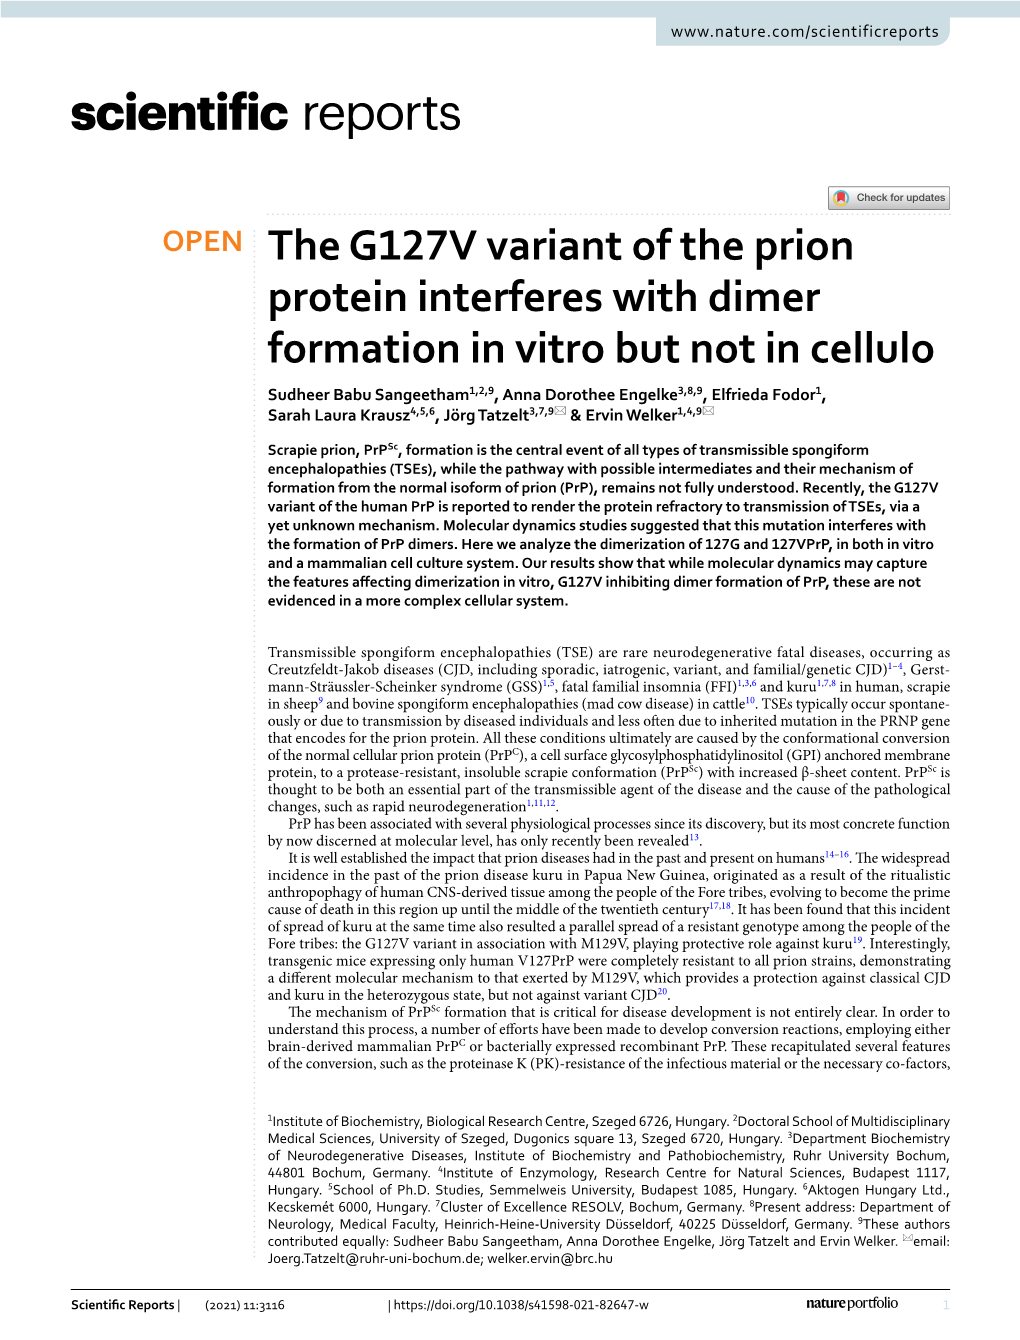 The G127V Variant of the Prion Protein Interferes with Dimer Formation In